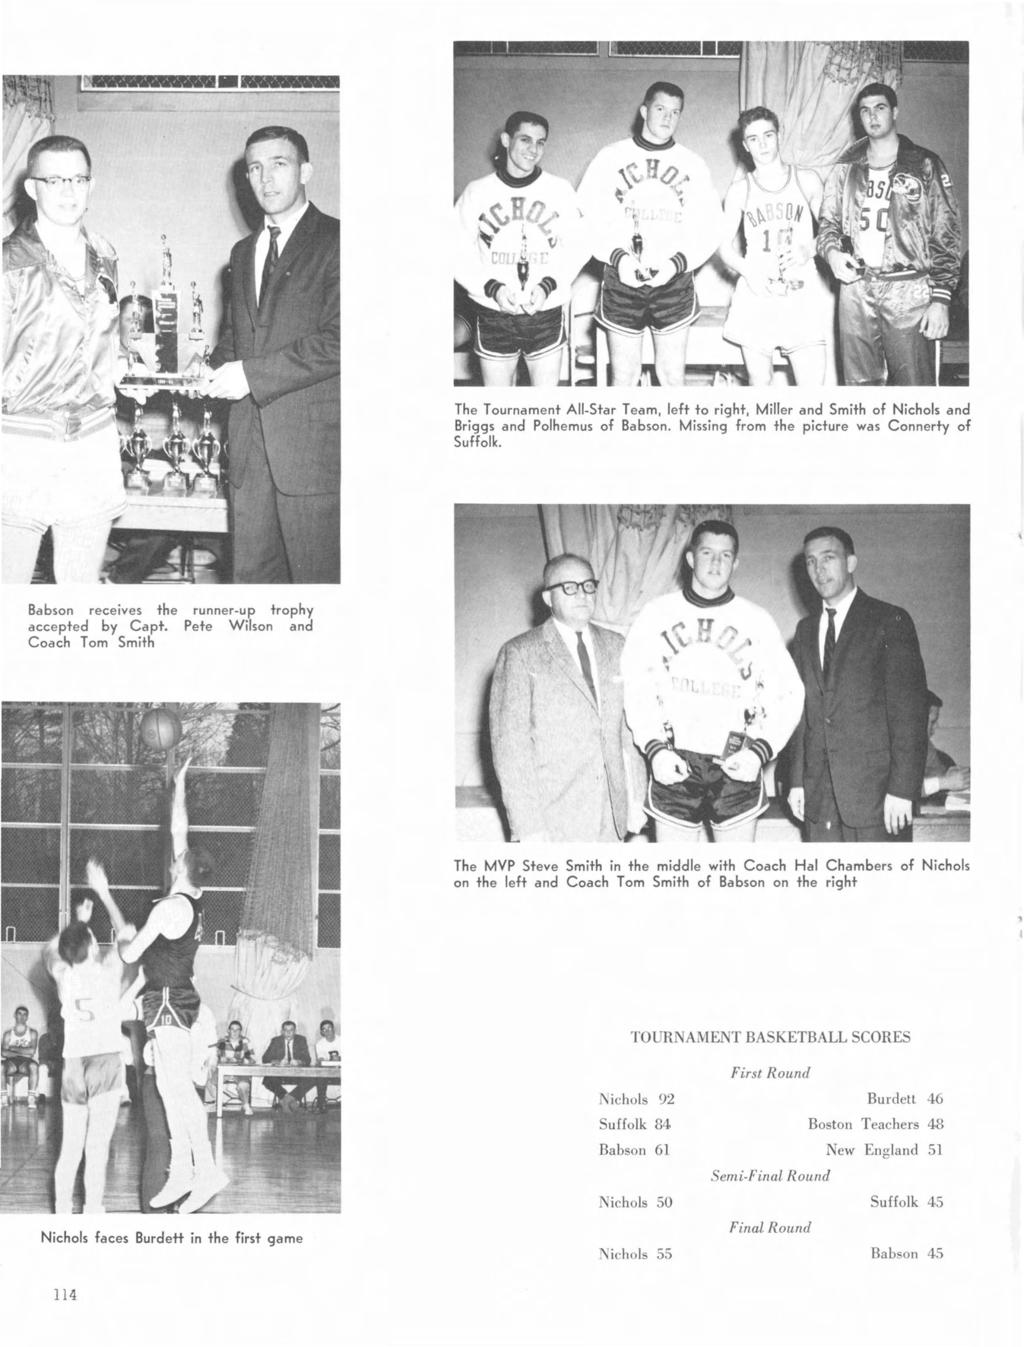 The Tournament All-Star Team, left to right, Miller and Smith of Nichols and Briggs and Polhemus of Babson. Missing from the picture was Connedy of Suffolk.